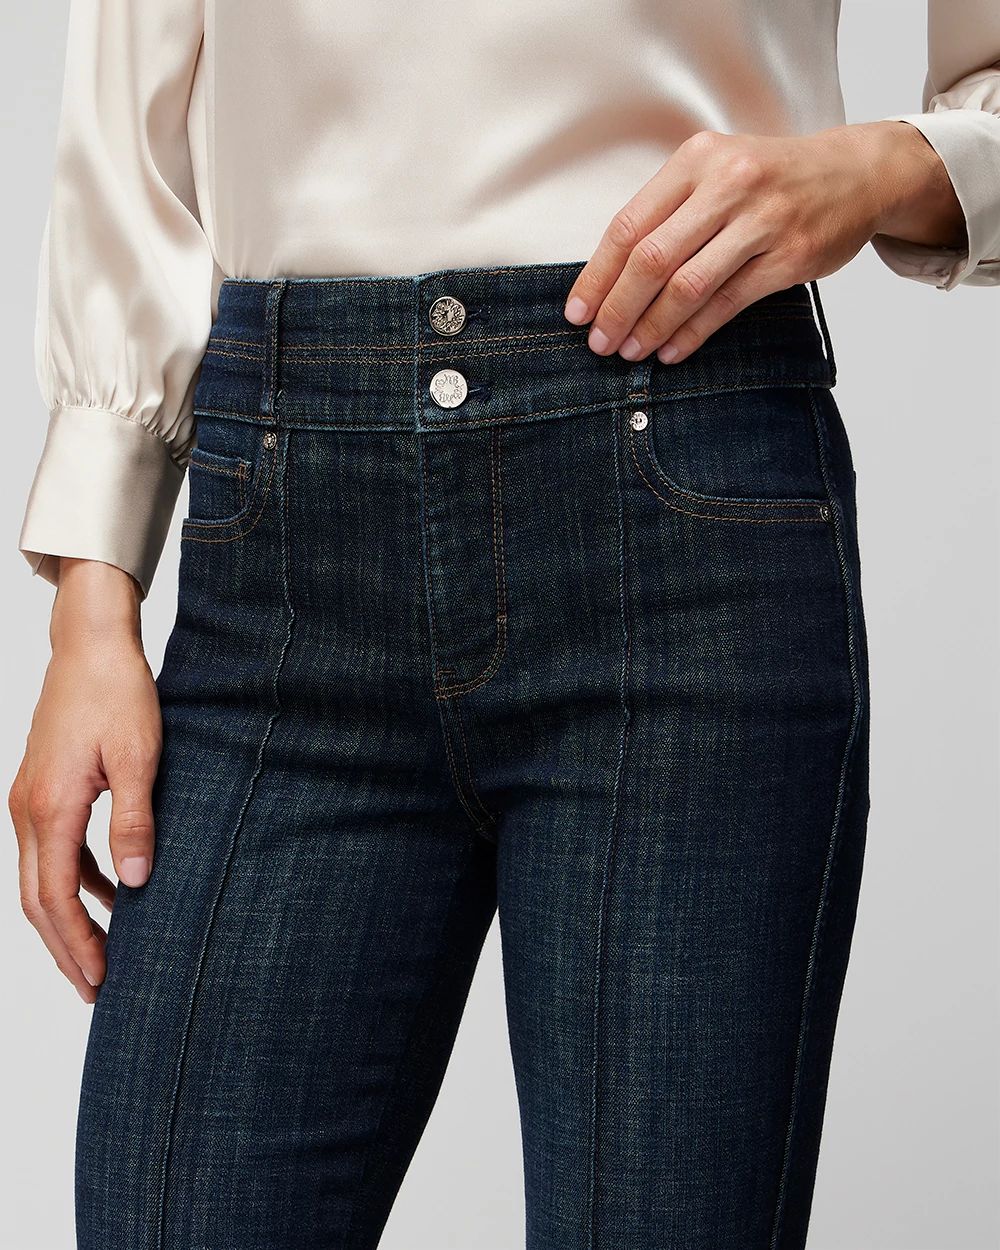 Extra-High Rise Pintuck Skinny Flare Jeans click to view larger image.